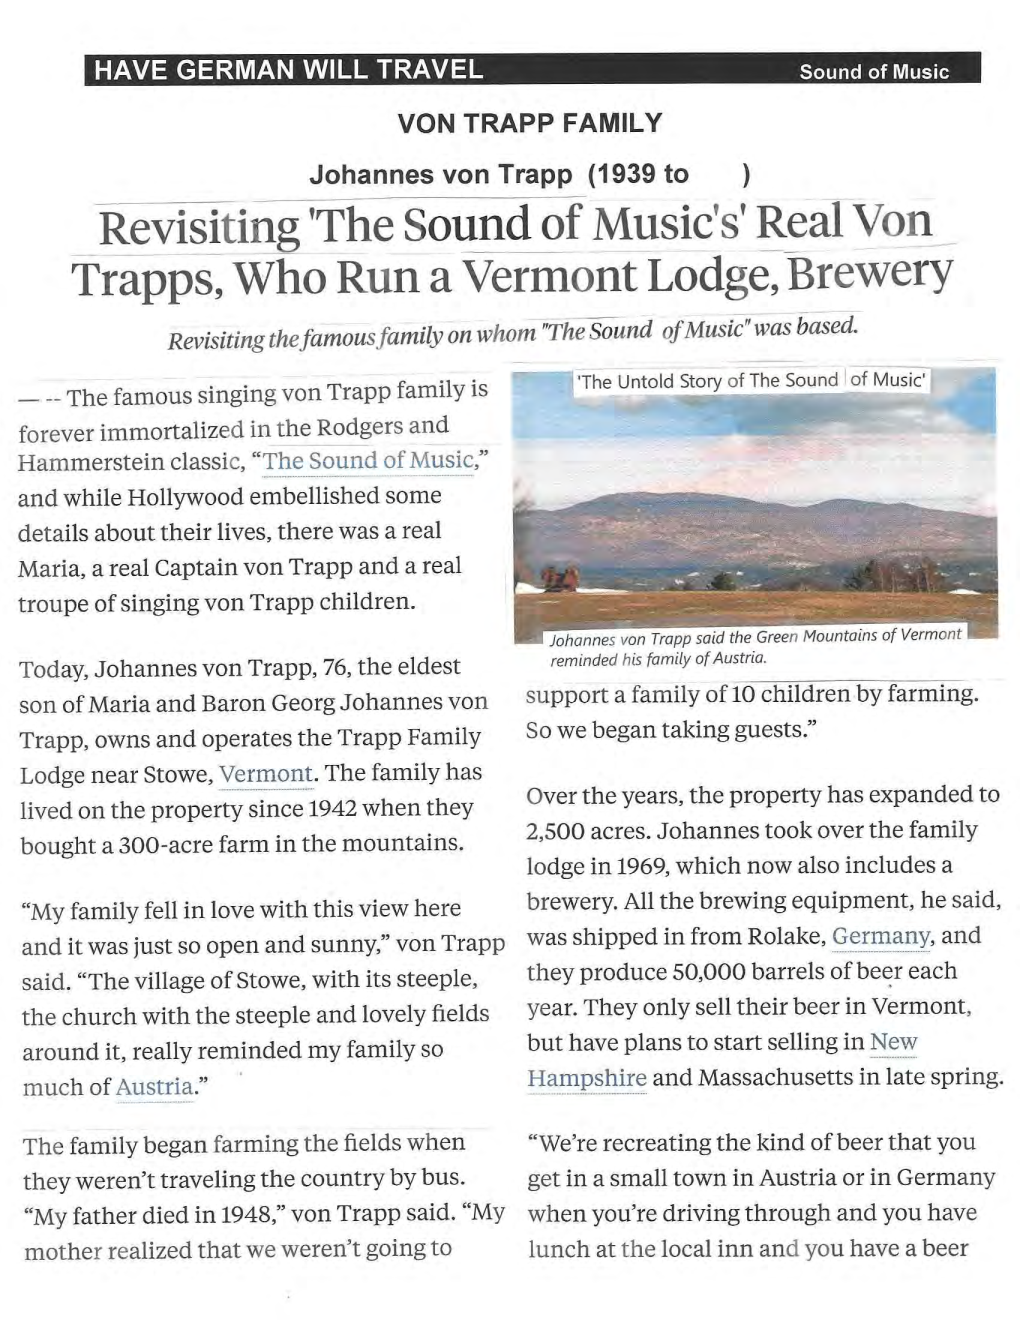 Revisiting 'The Sound of Music's' Real Von Trapps, Who Run a Vermont Lodge, Brewery Revisiting the Famous Family on Whom "The Sound Ofmusic" Was Based